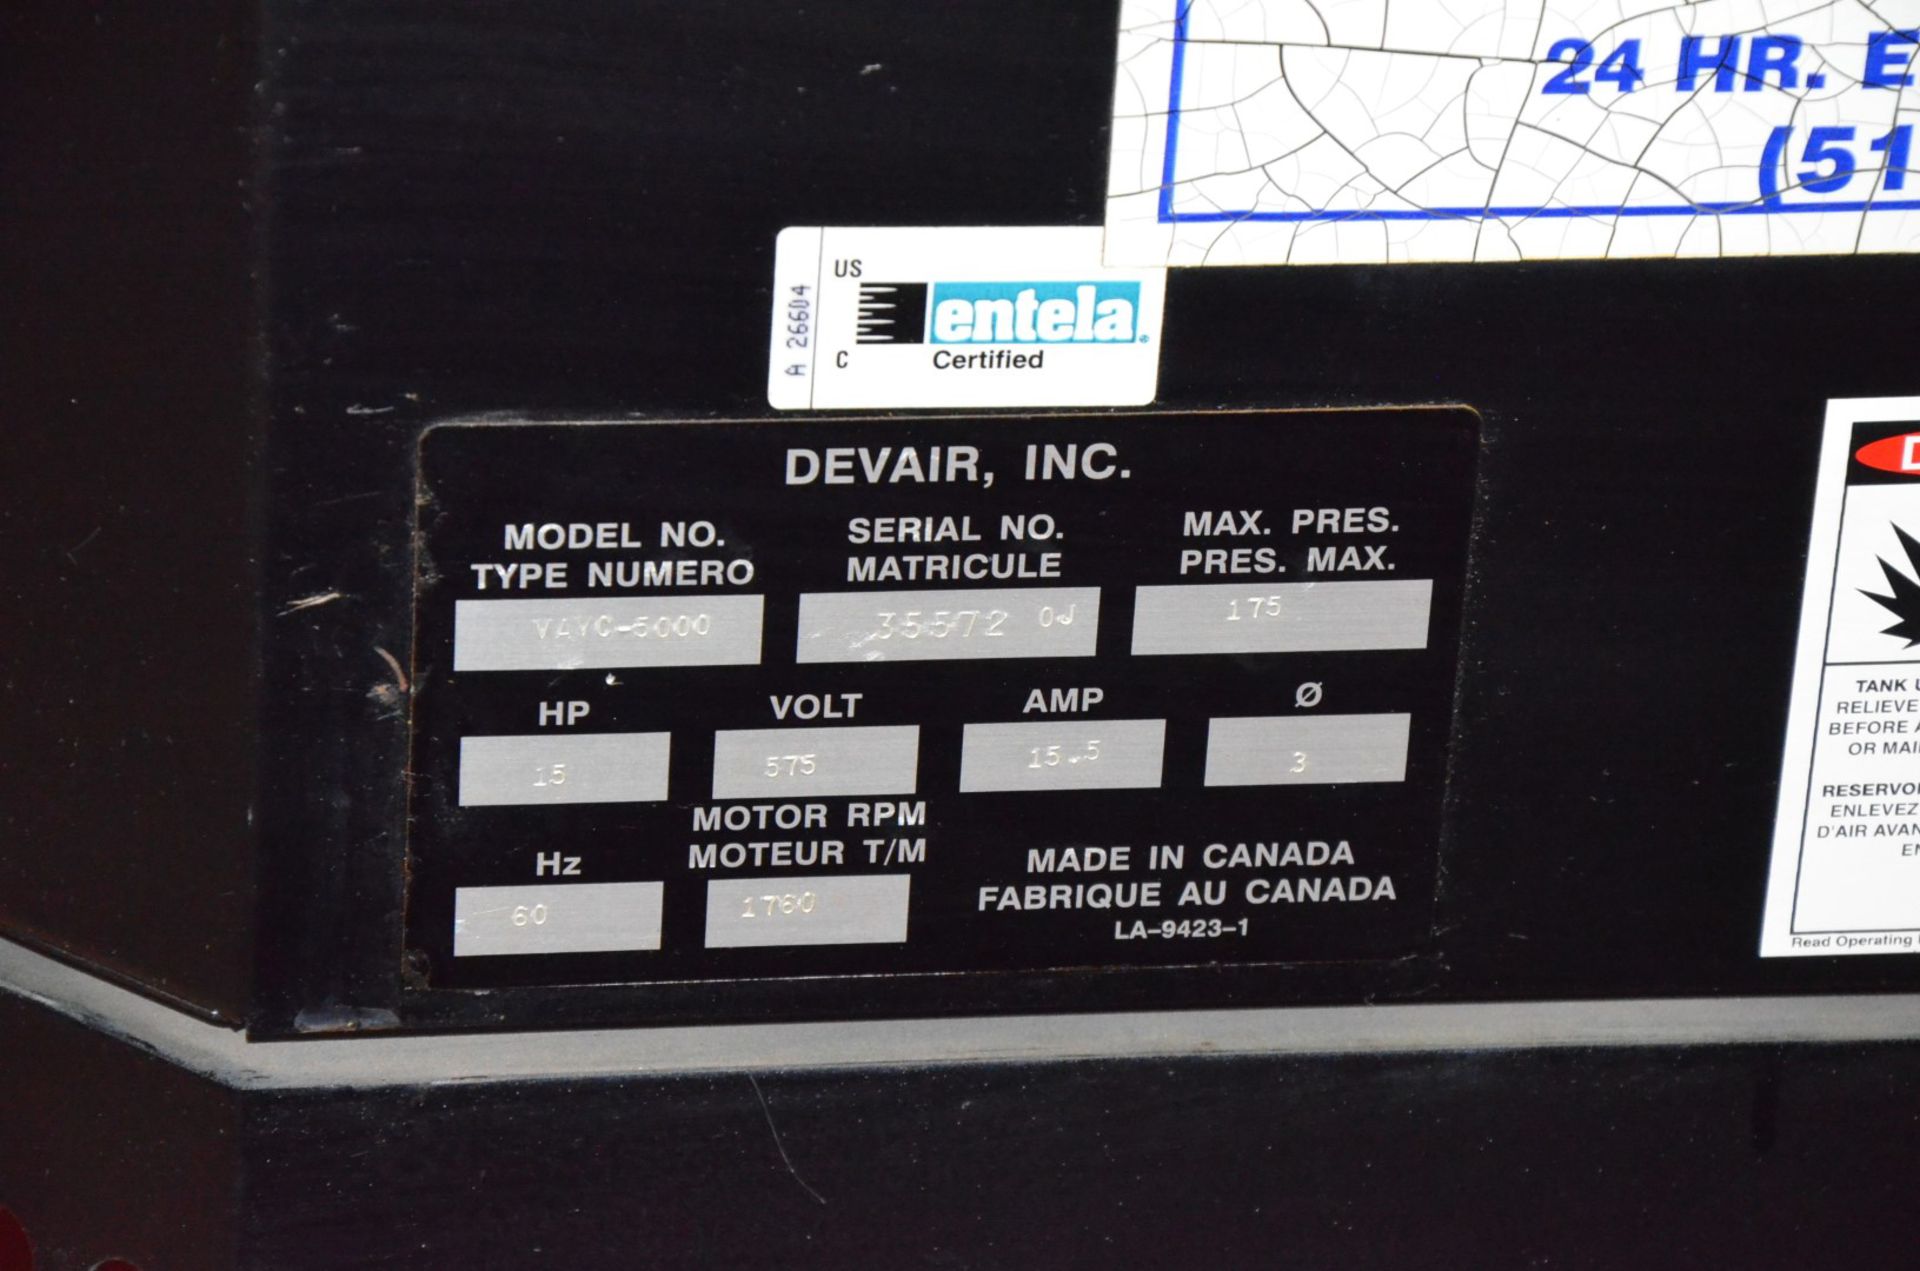 DEVAIR VAVC-5000 15 HP AIR COMPRESSOR WITH 175 MAX. PSI, 1760 RPM, 6,870 HOURS (RECORDED ON METER AT - Image 5 of 6